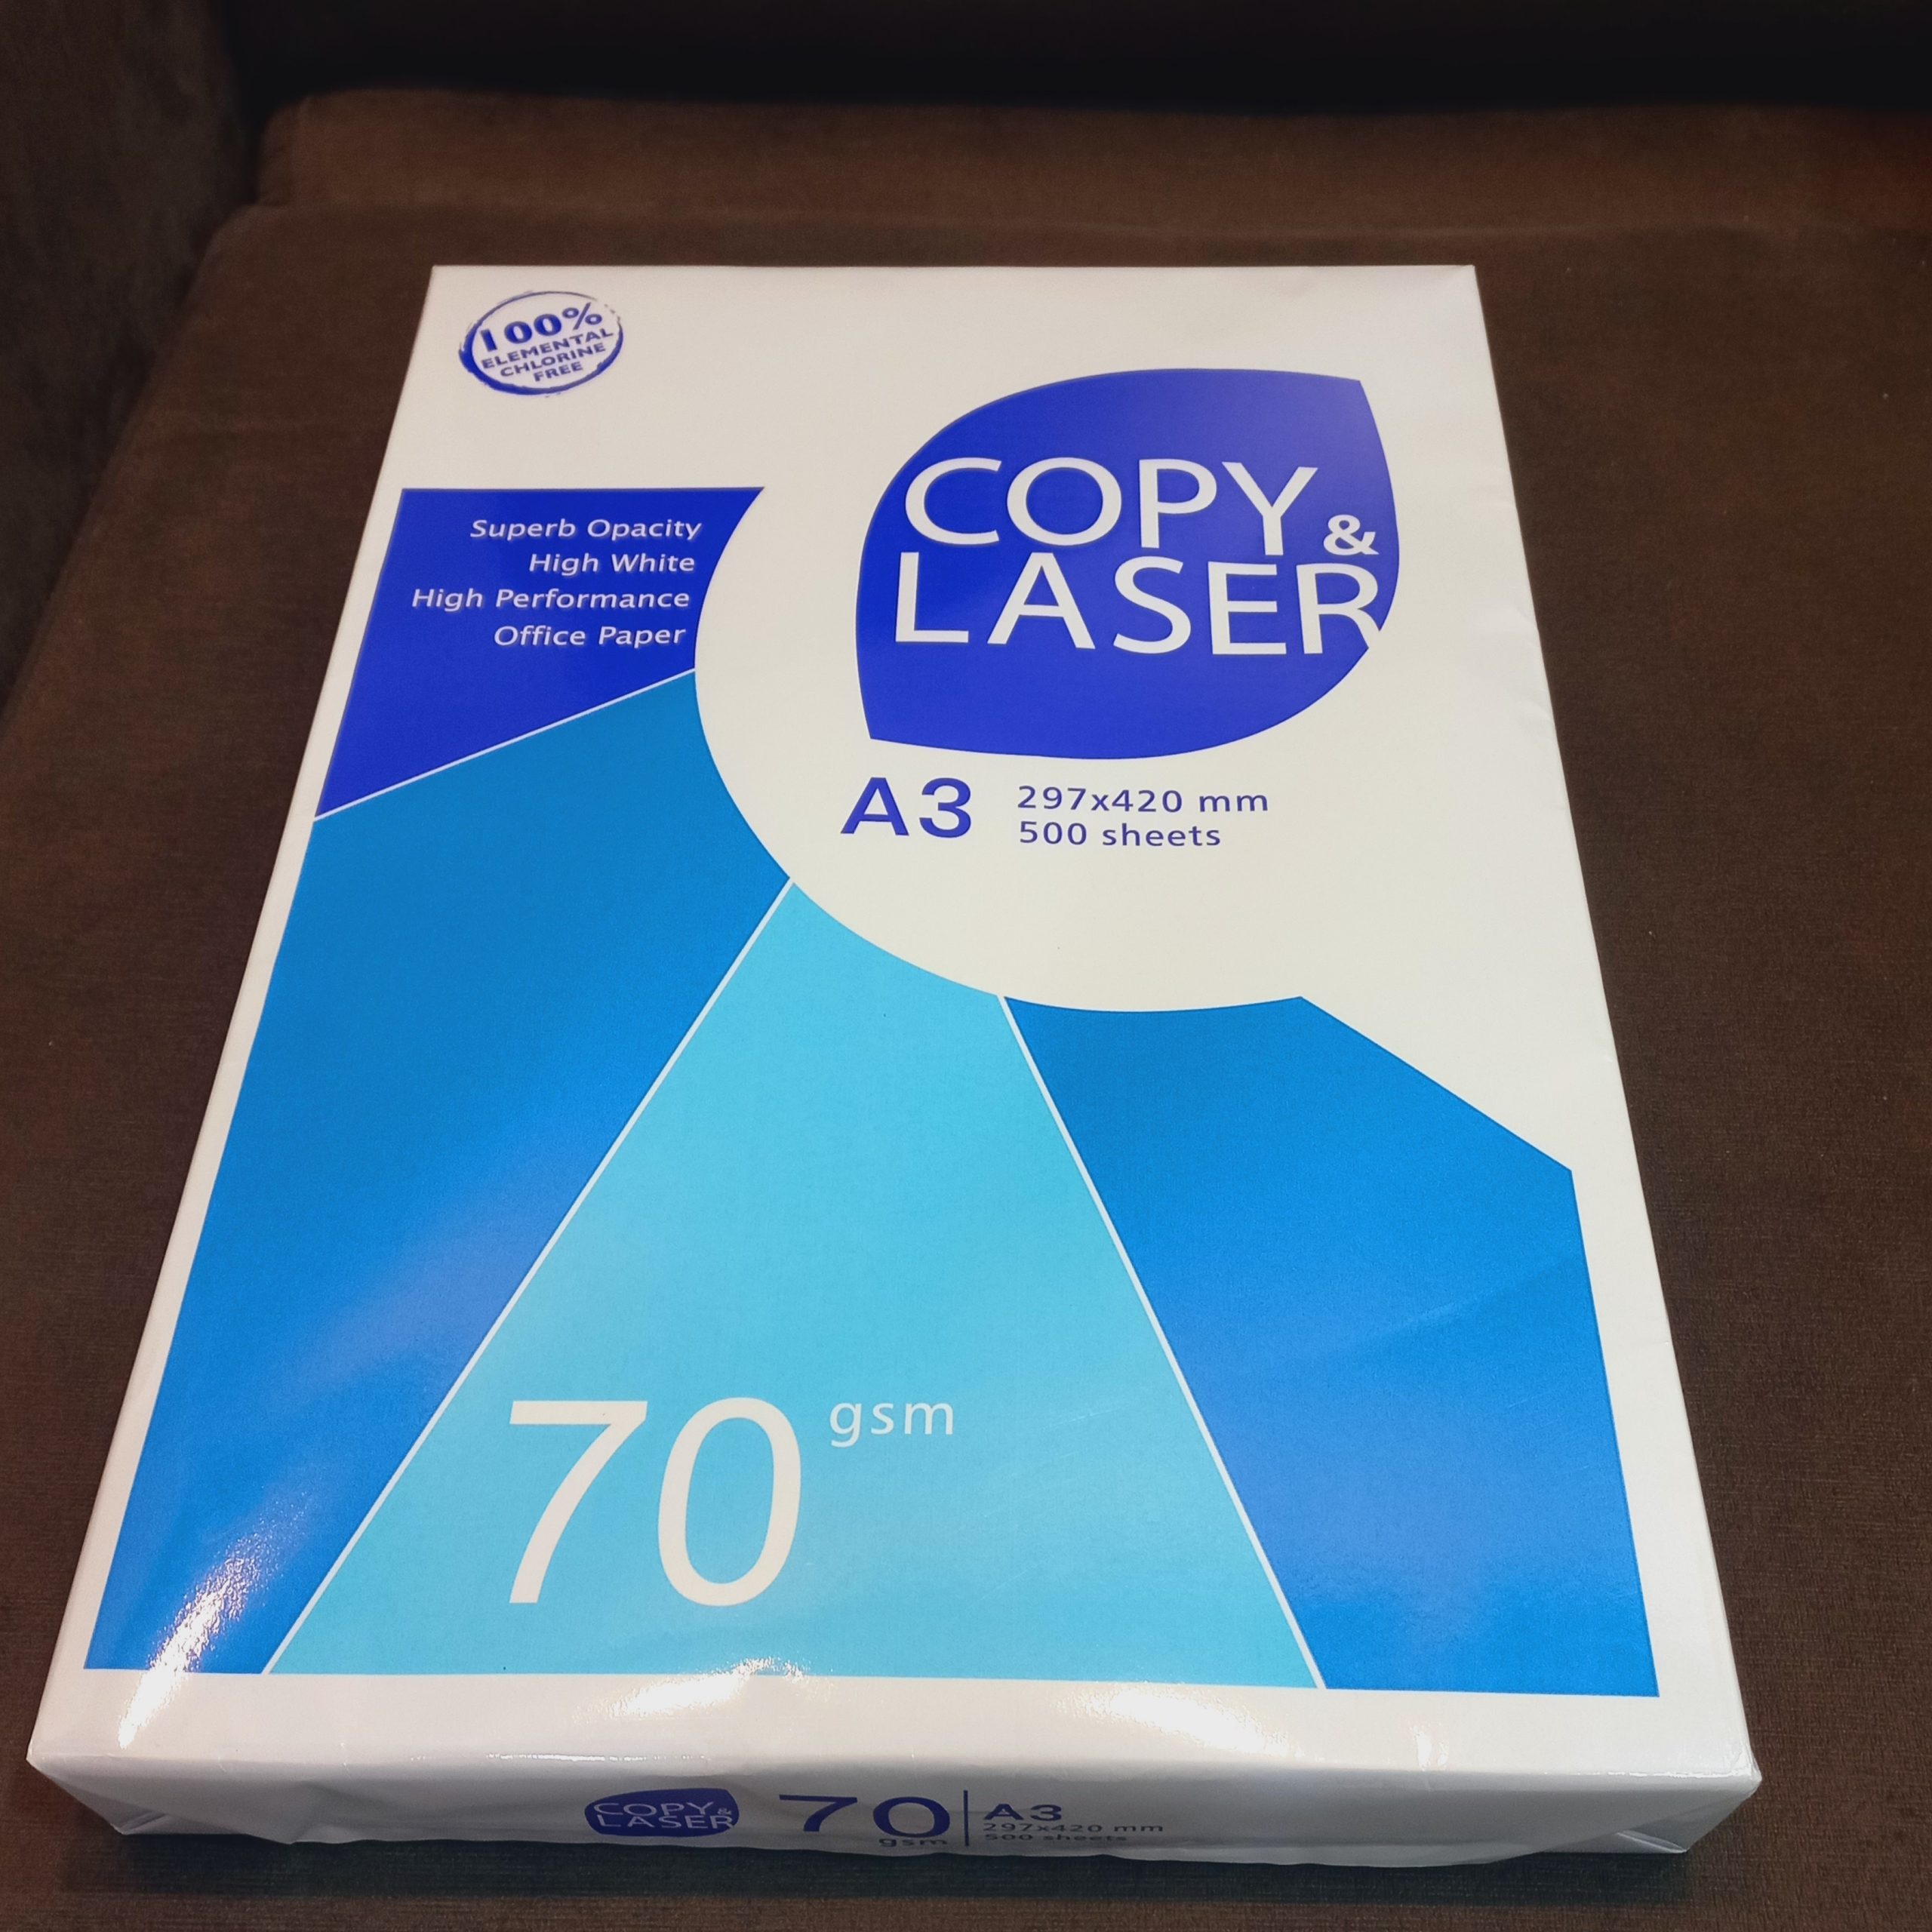 Bond Paper (Copy and Laser) - A3 70 gsm 500s - Supplies 24/7 Delivery